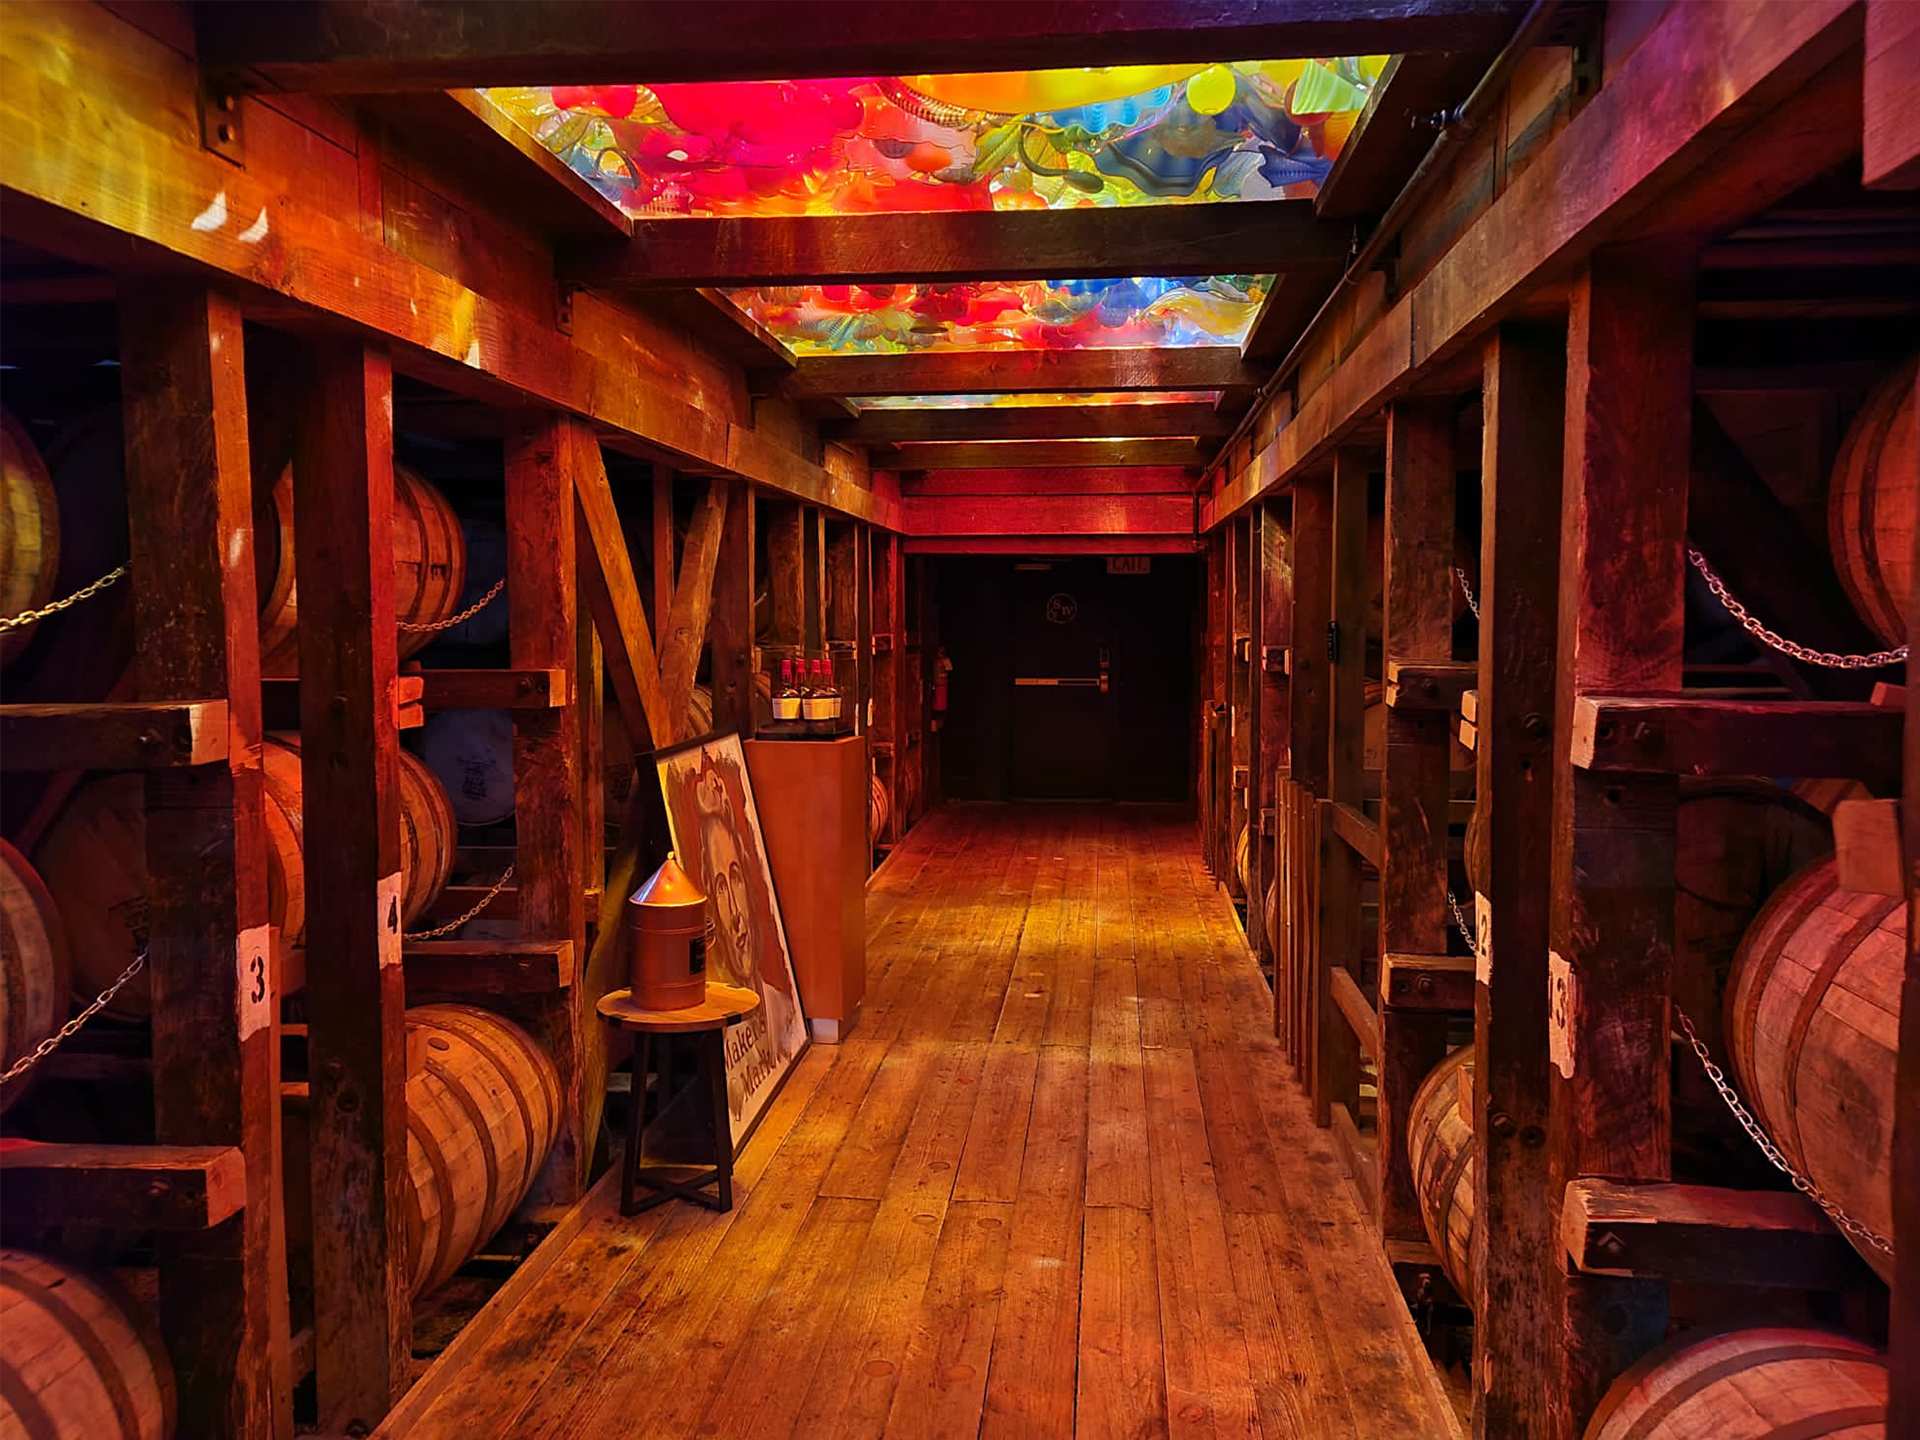 Louisville Kentucky Bourbon | Dale Chihuly installation in the Maker’s Mark barrel warehouse